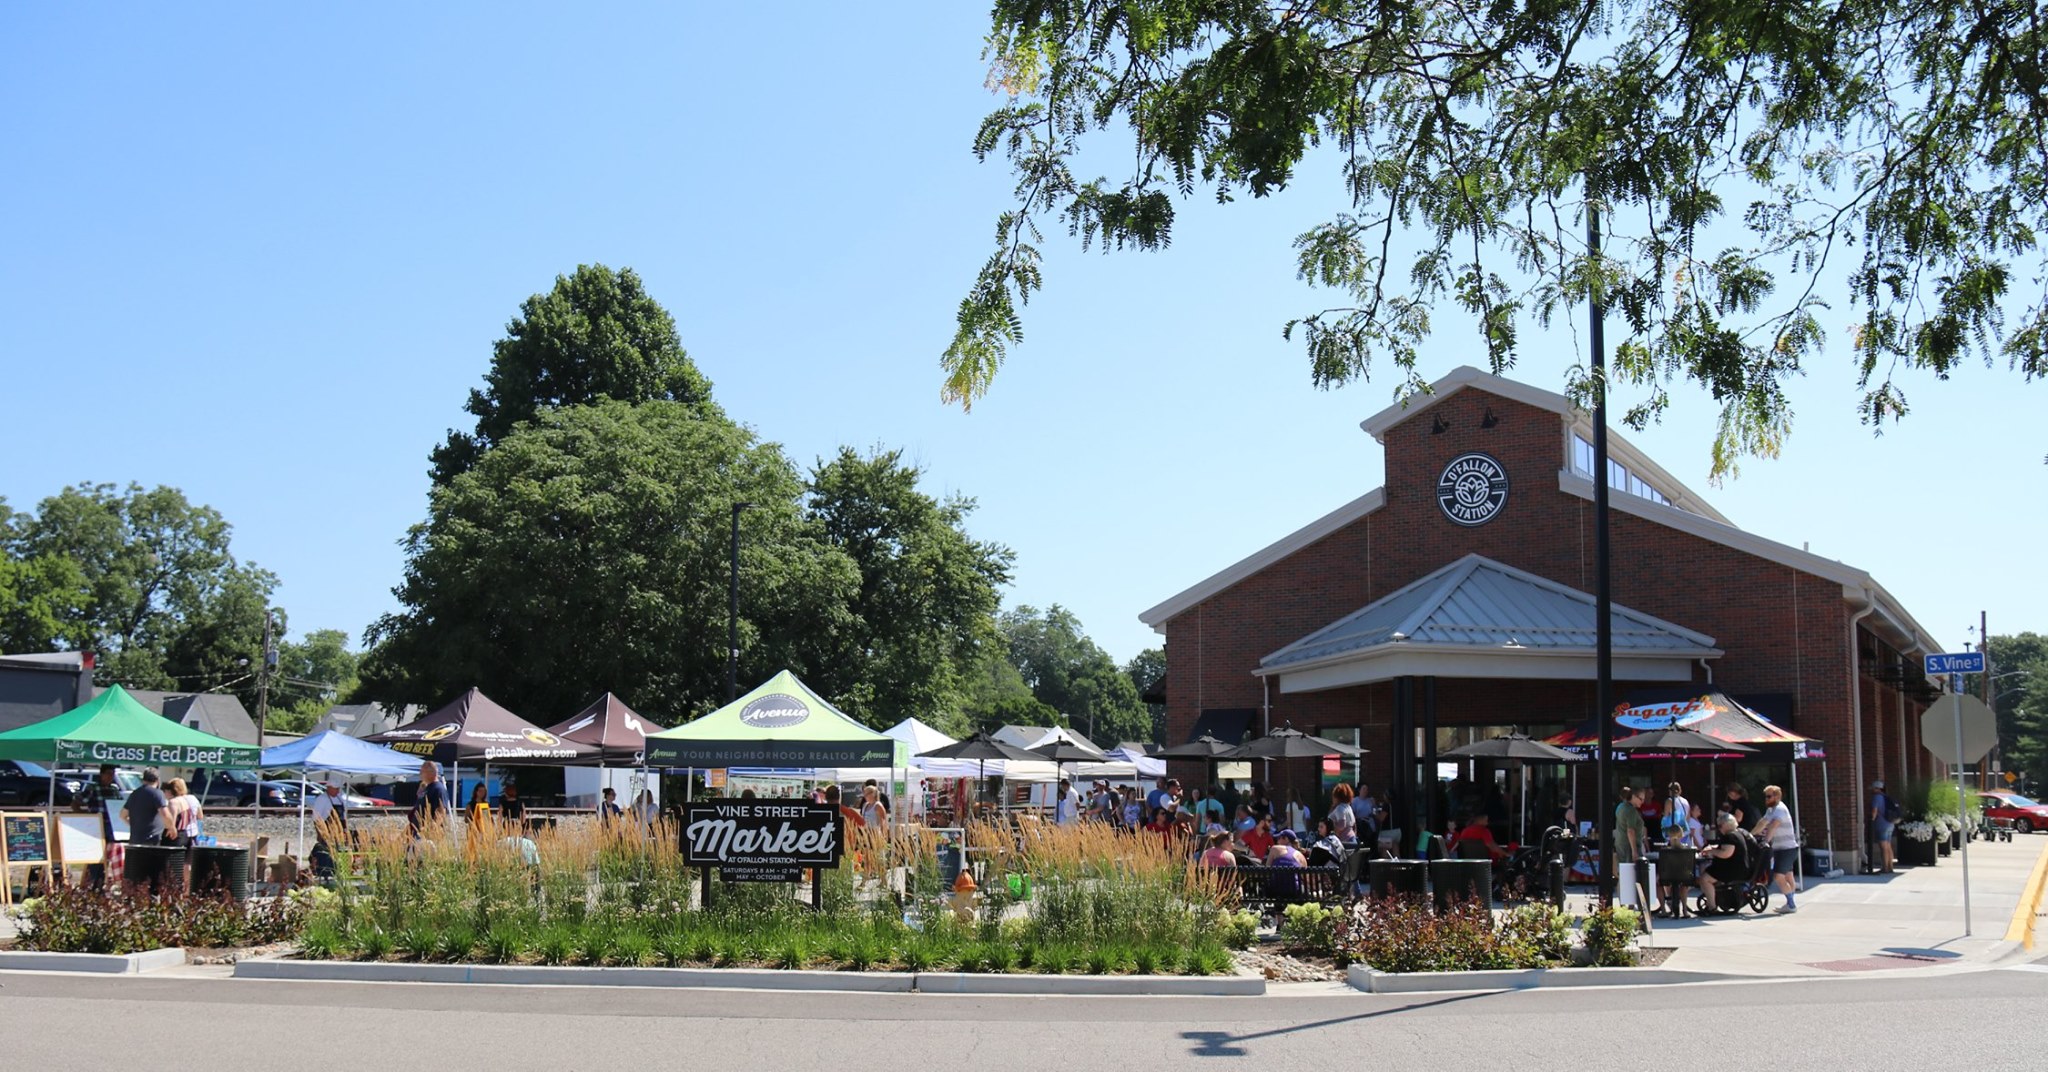 Downstate Illinois Road Trip Roundup - National Farmers Market Week 